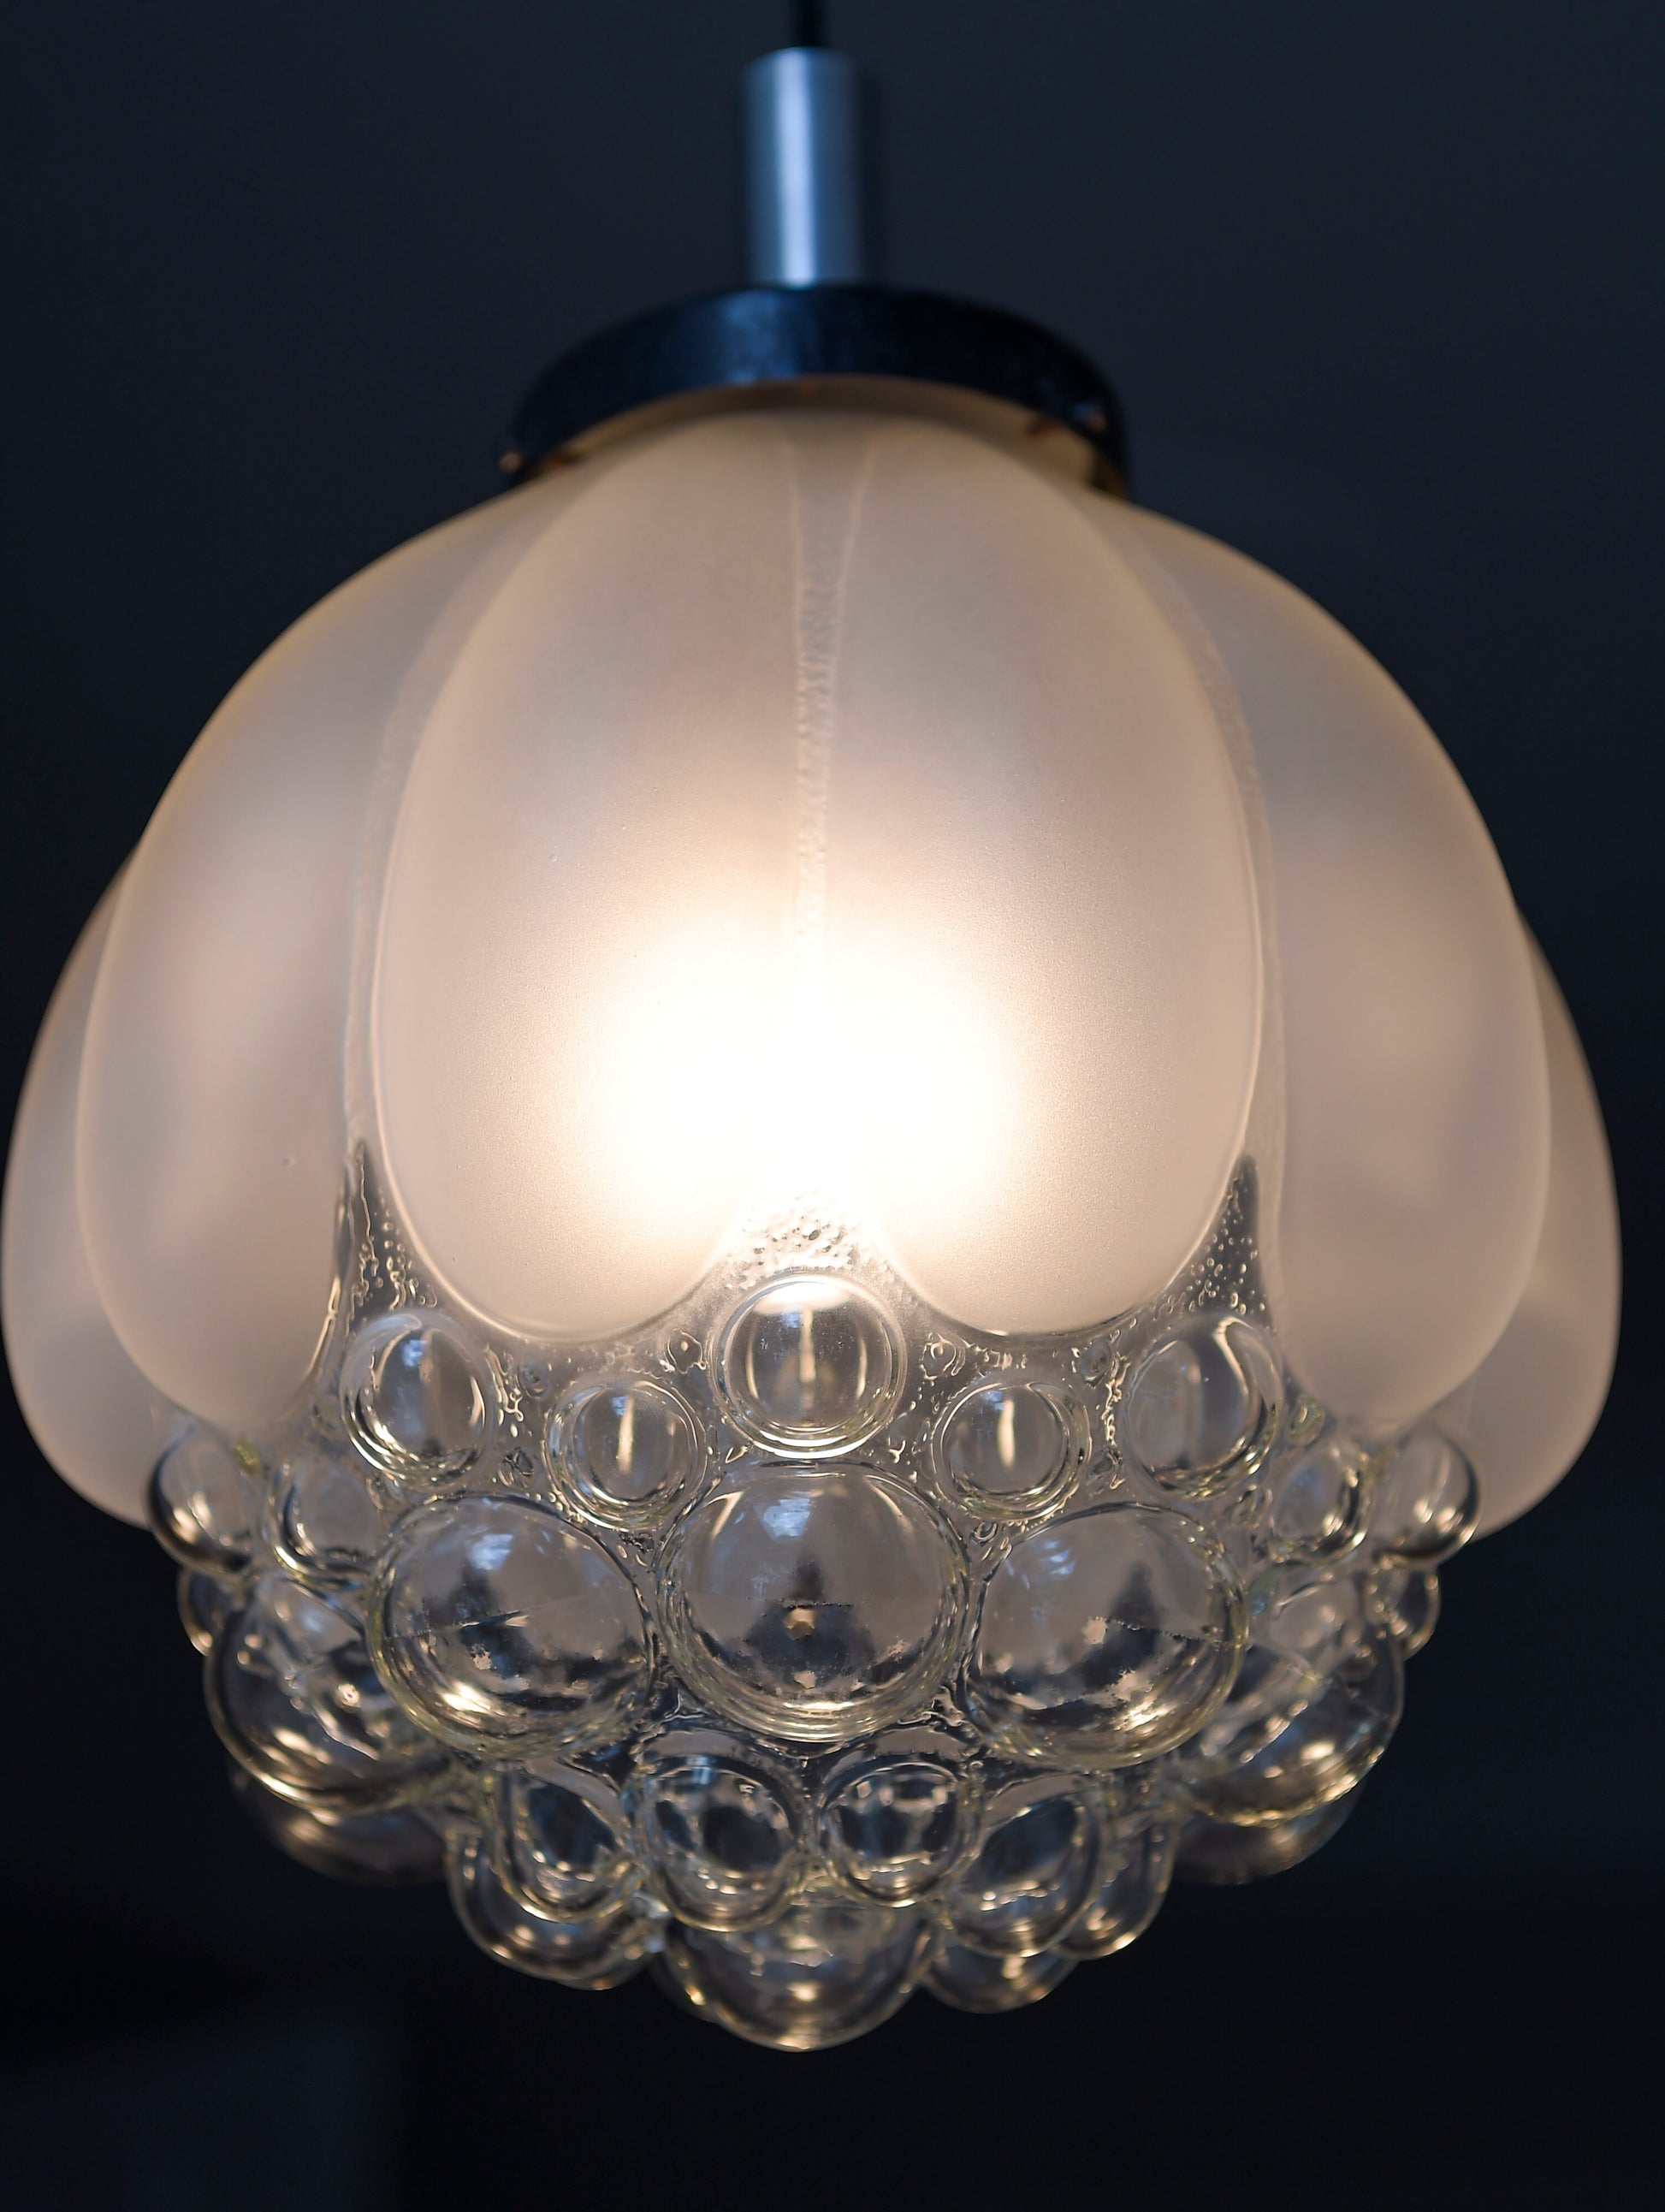 salvaged and restored Retro pendant ceiling & wall lights,industrial,table lamps Antique,Vintage - projectvintage.co.uk